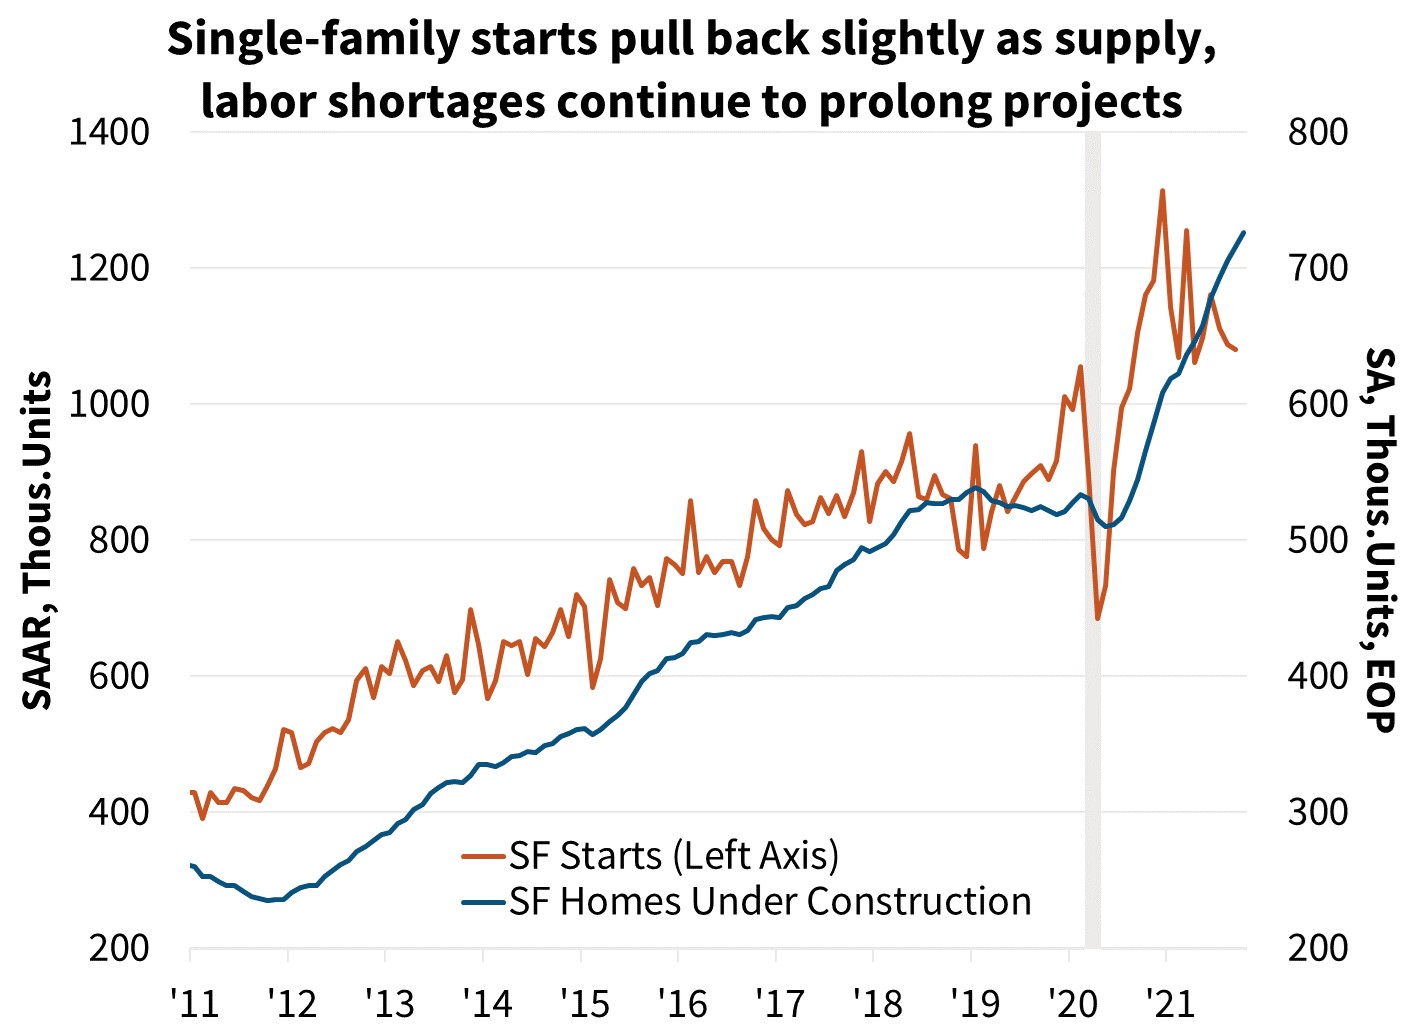  Single-family starts pull back slightly as supply labor shortages continue to prolong projects 